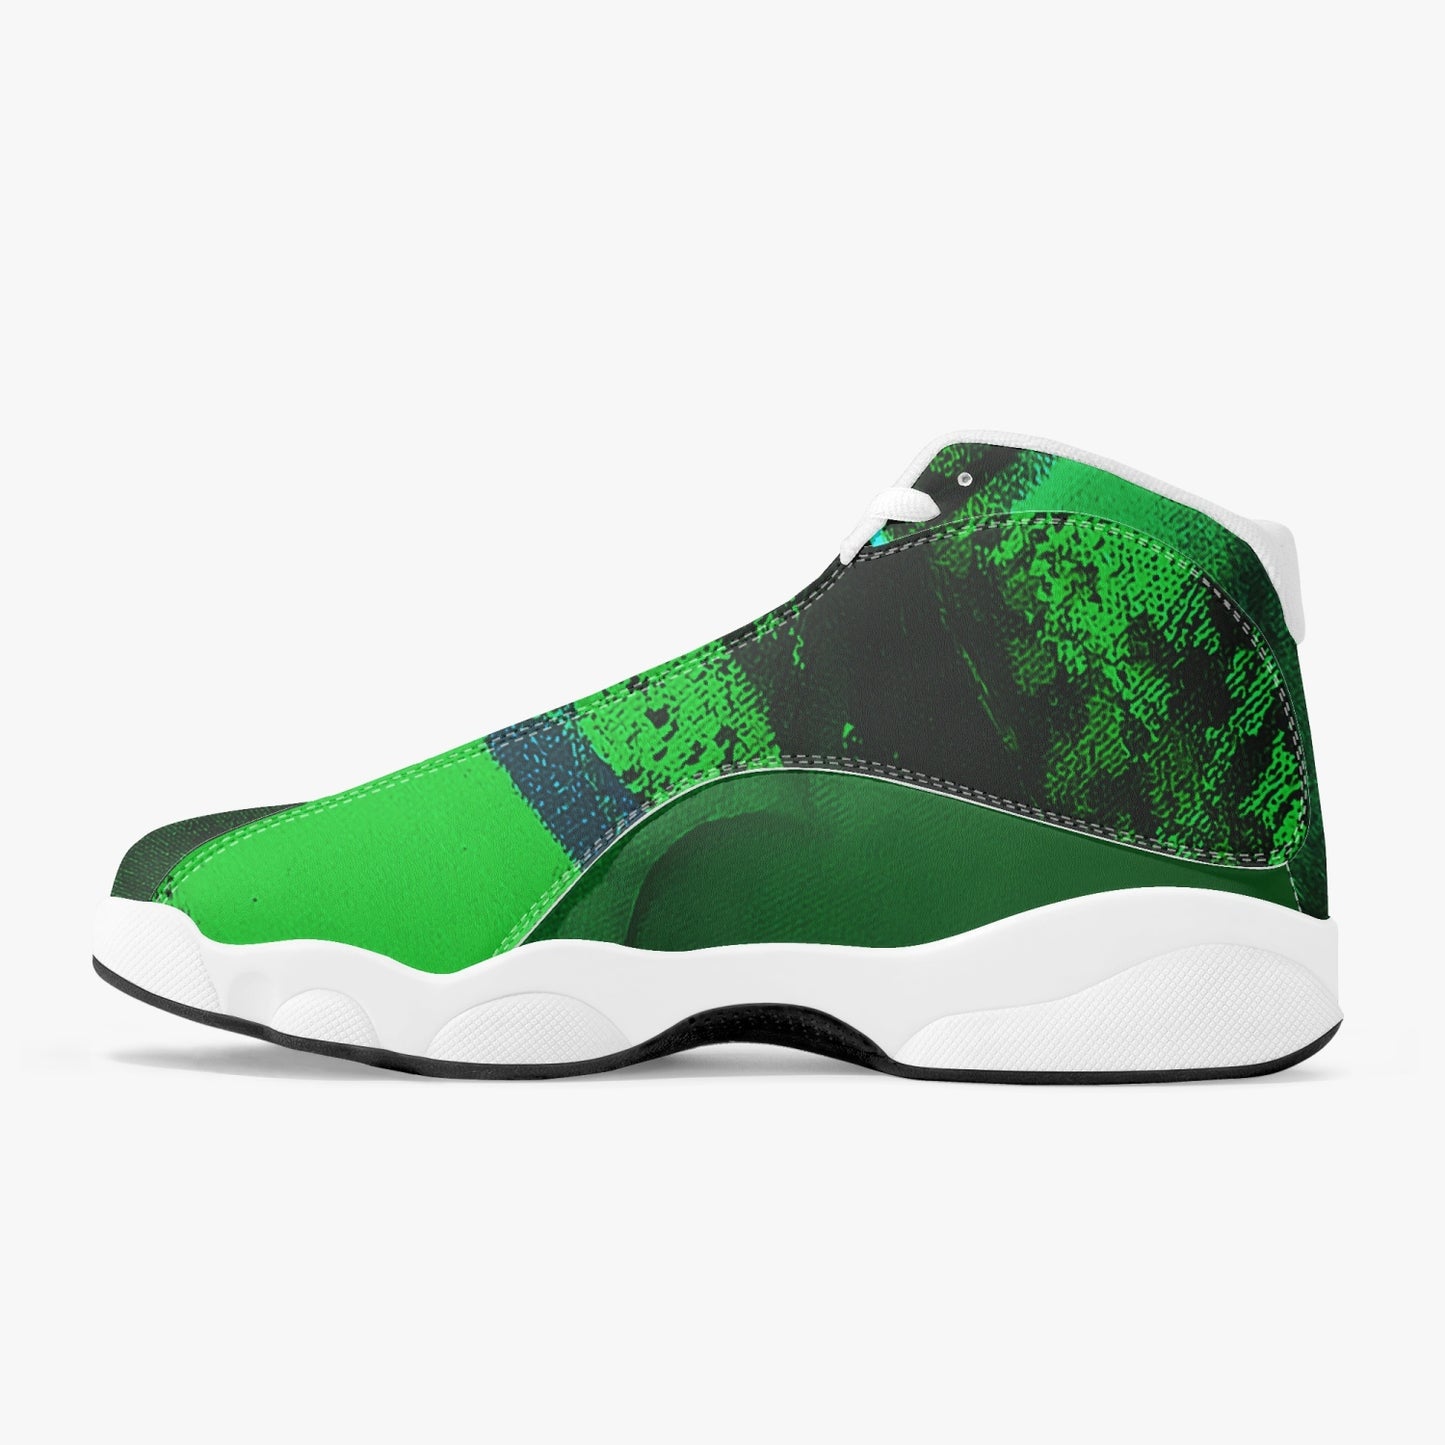 High-end leather basketball sneakers "Greenone"